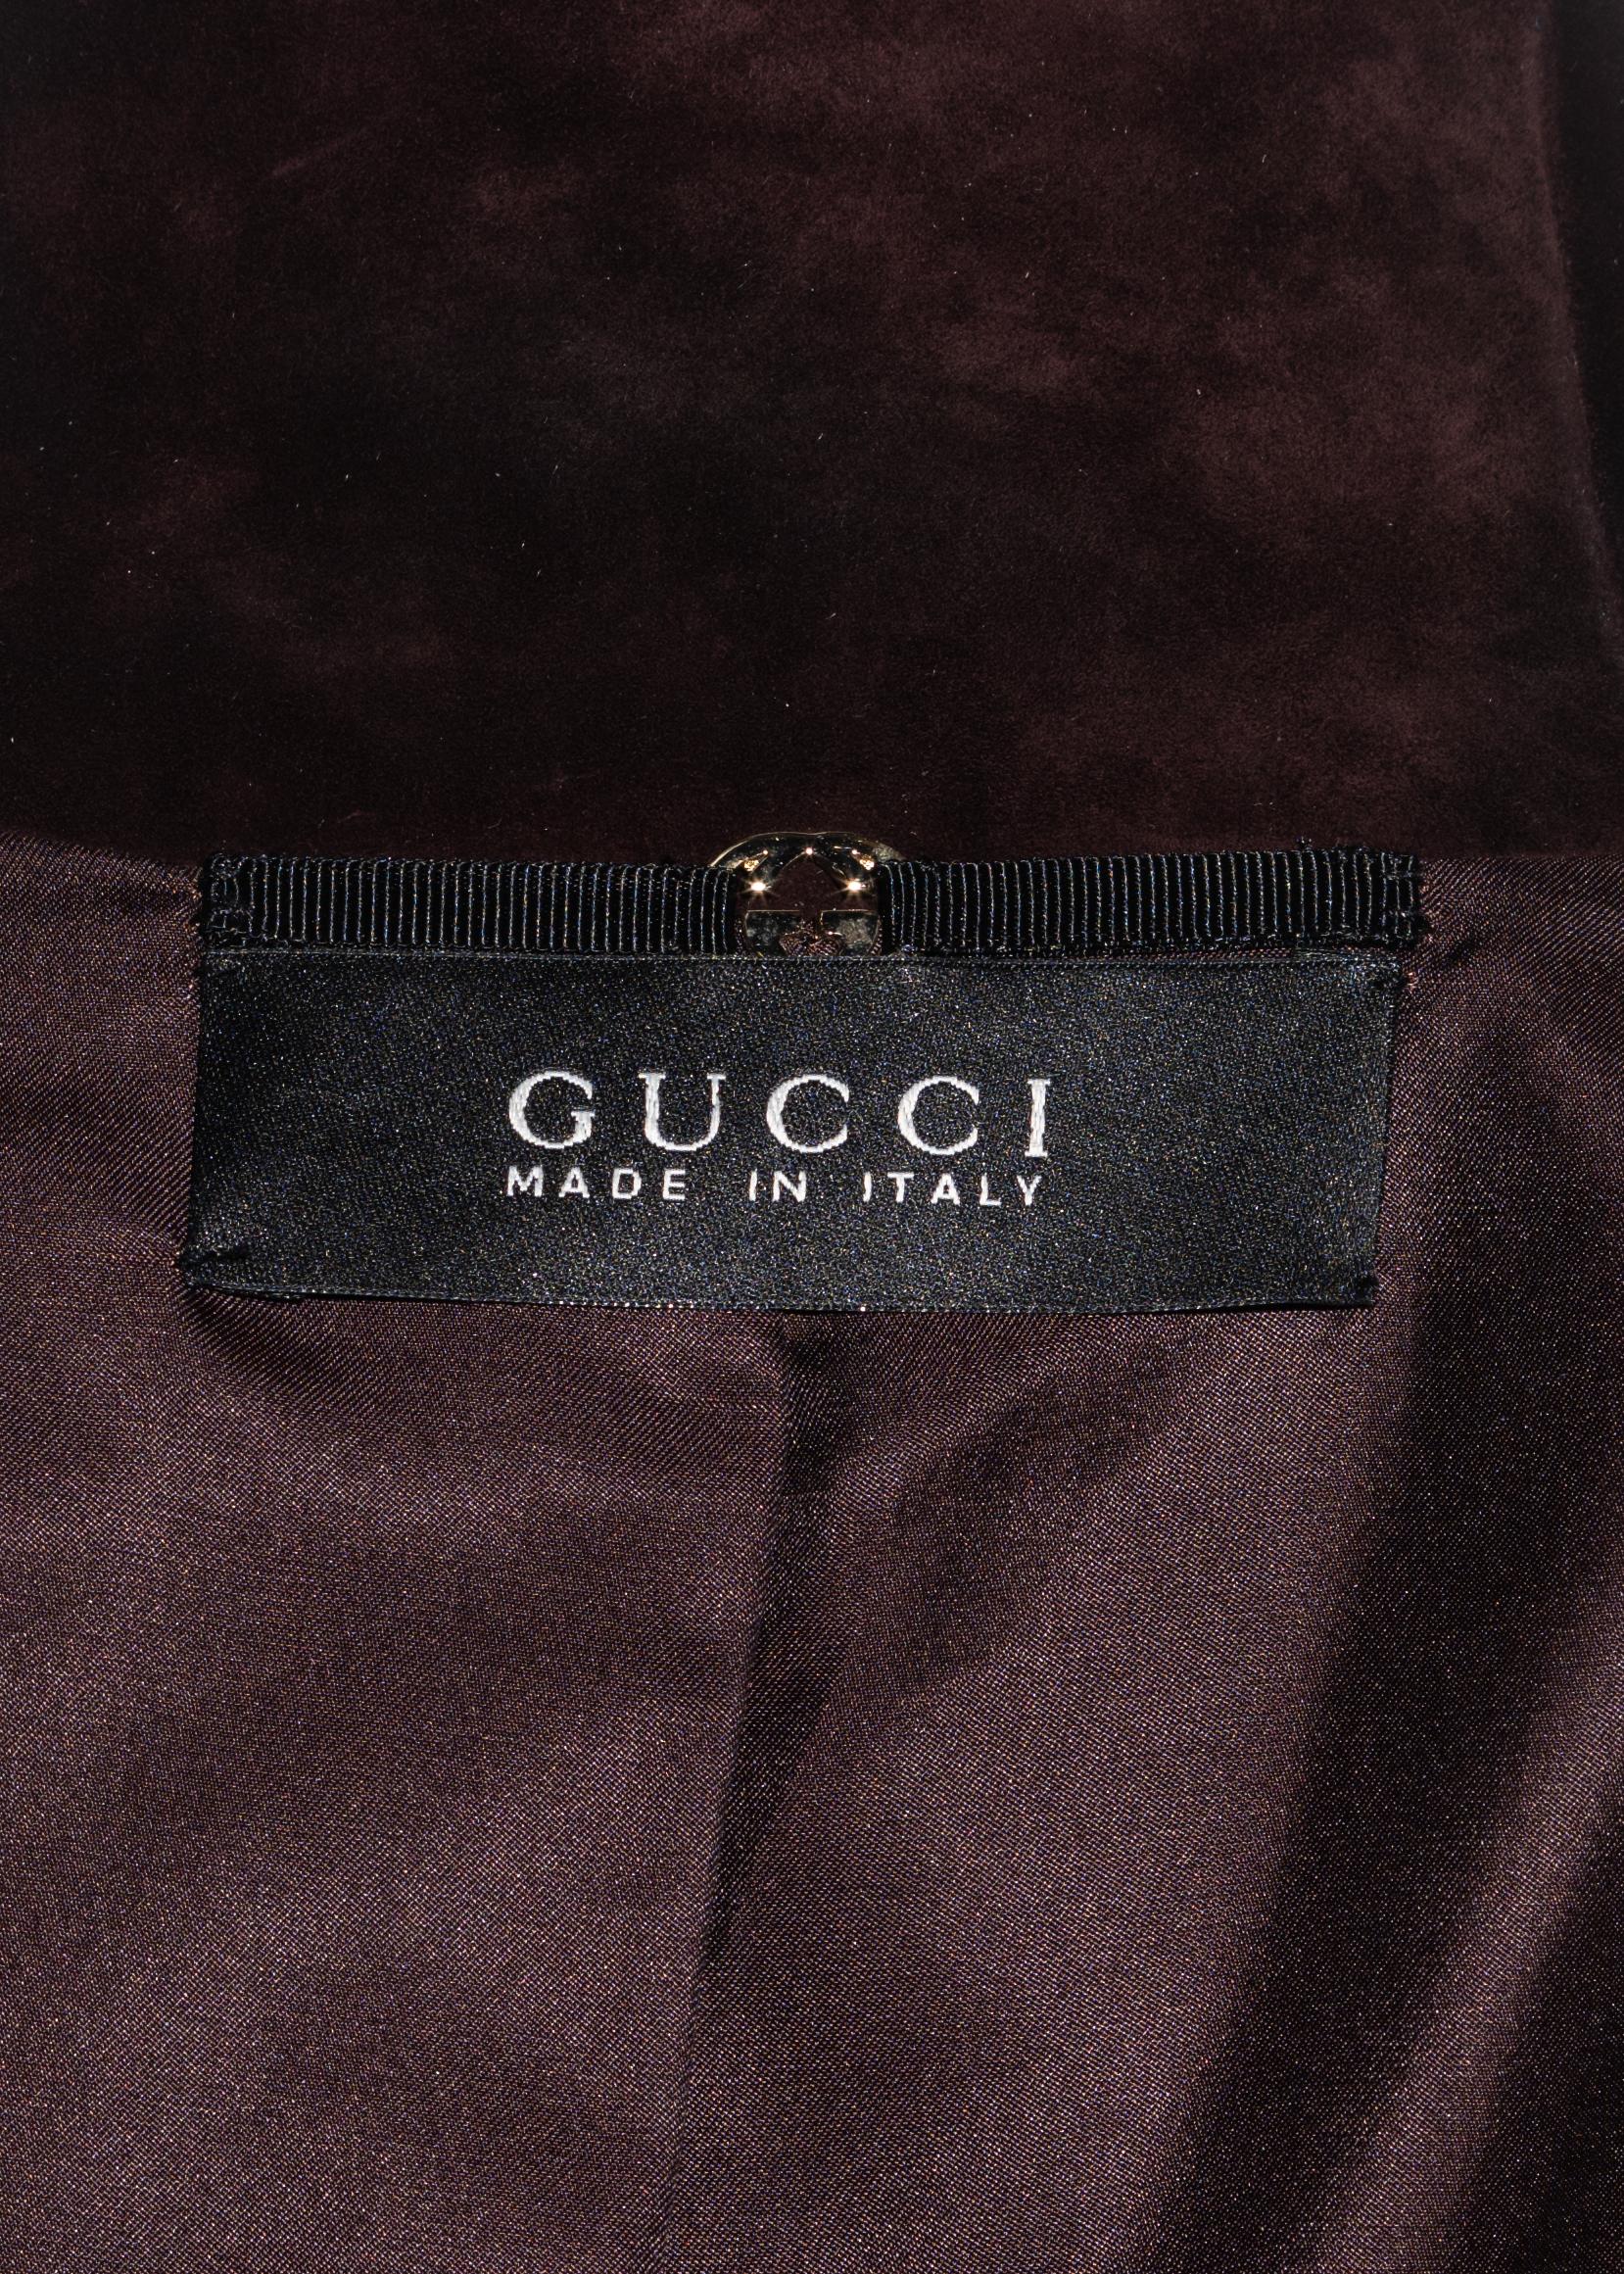 Gucci by Tom Ford brown suede and python jacket, fw 2004 2